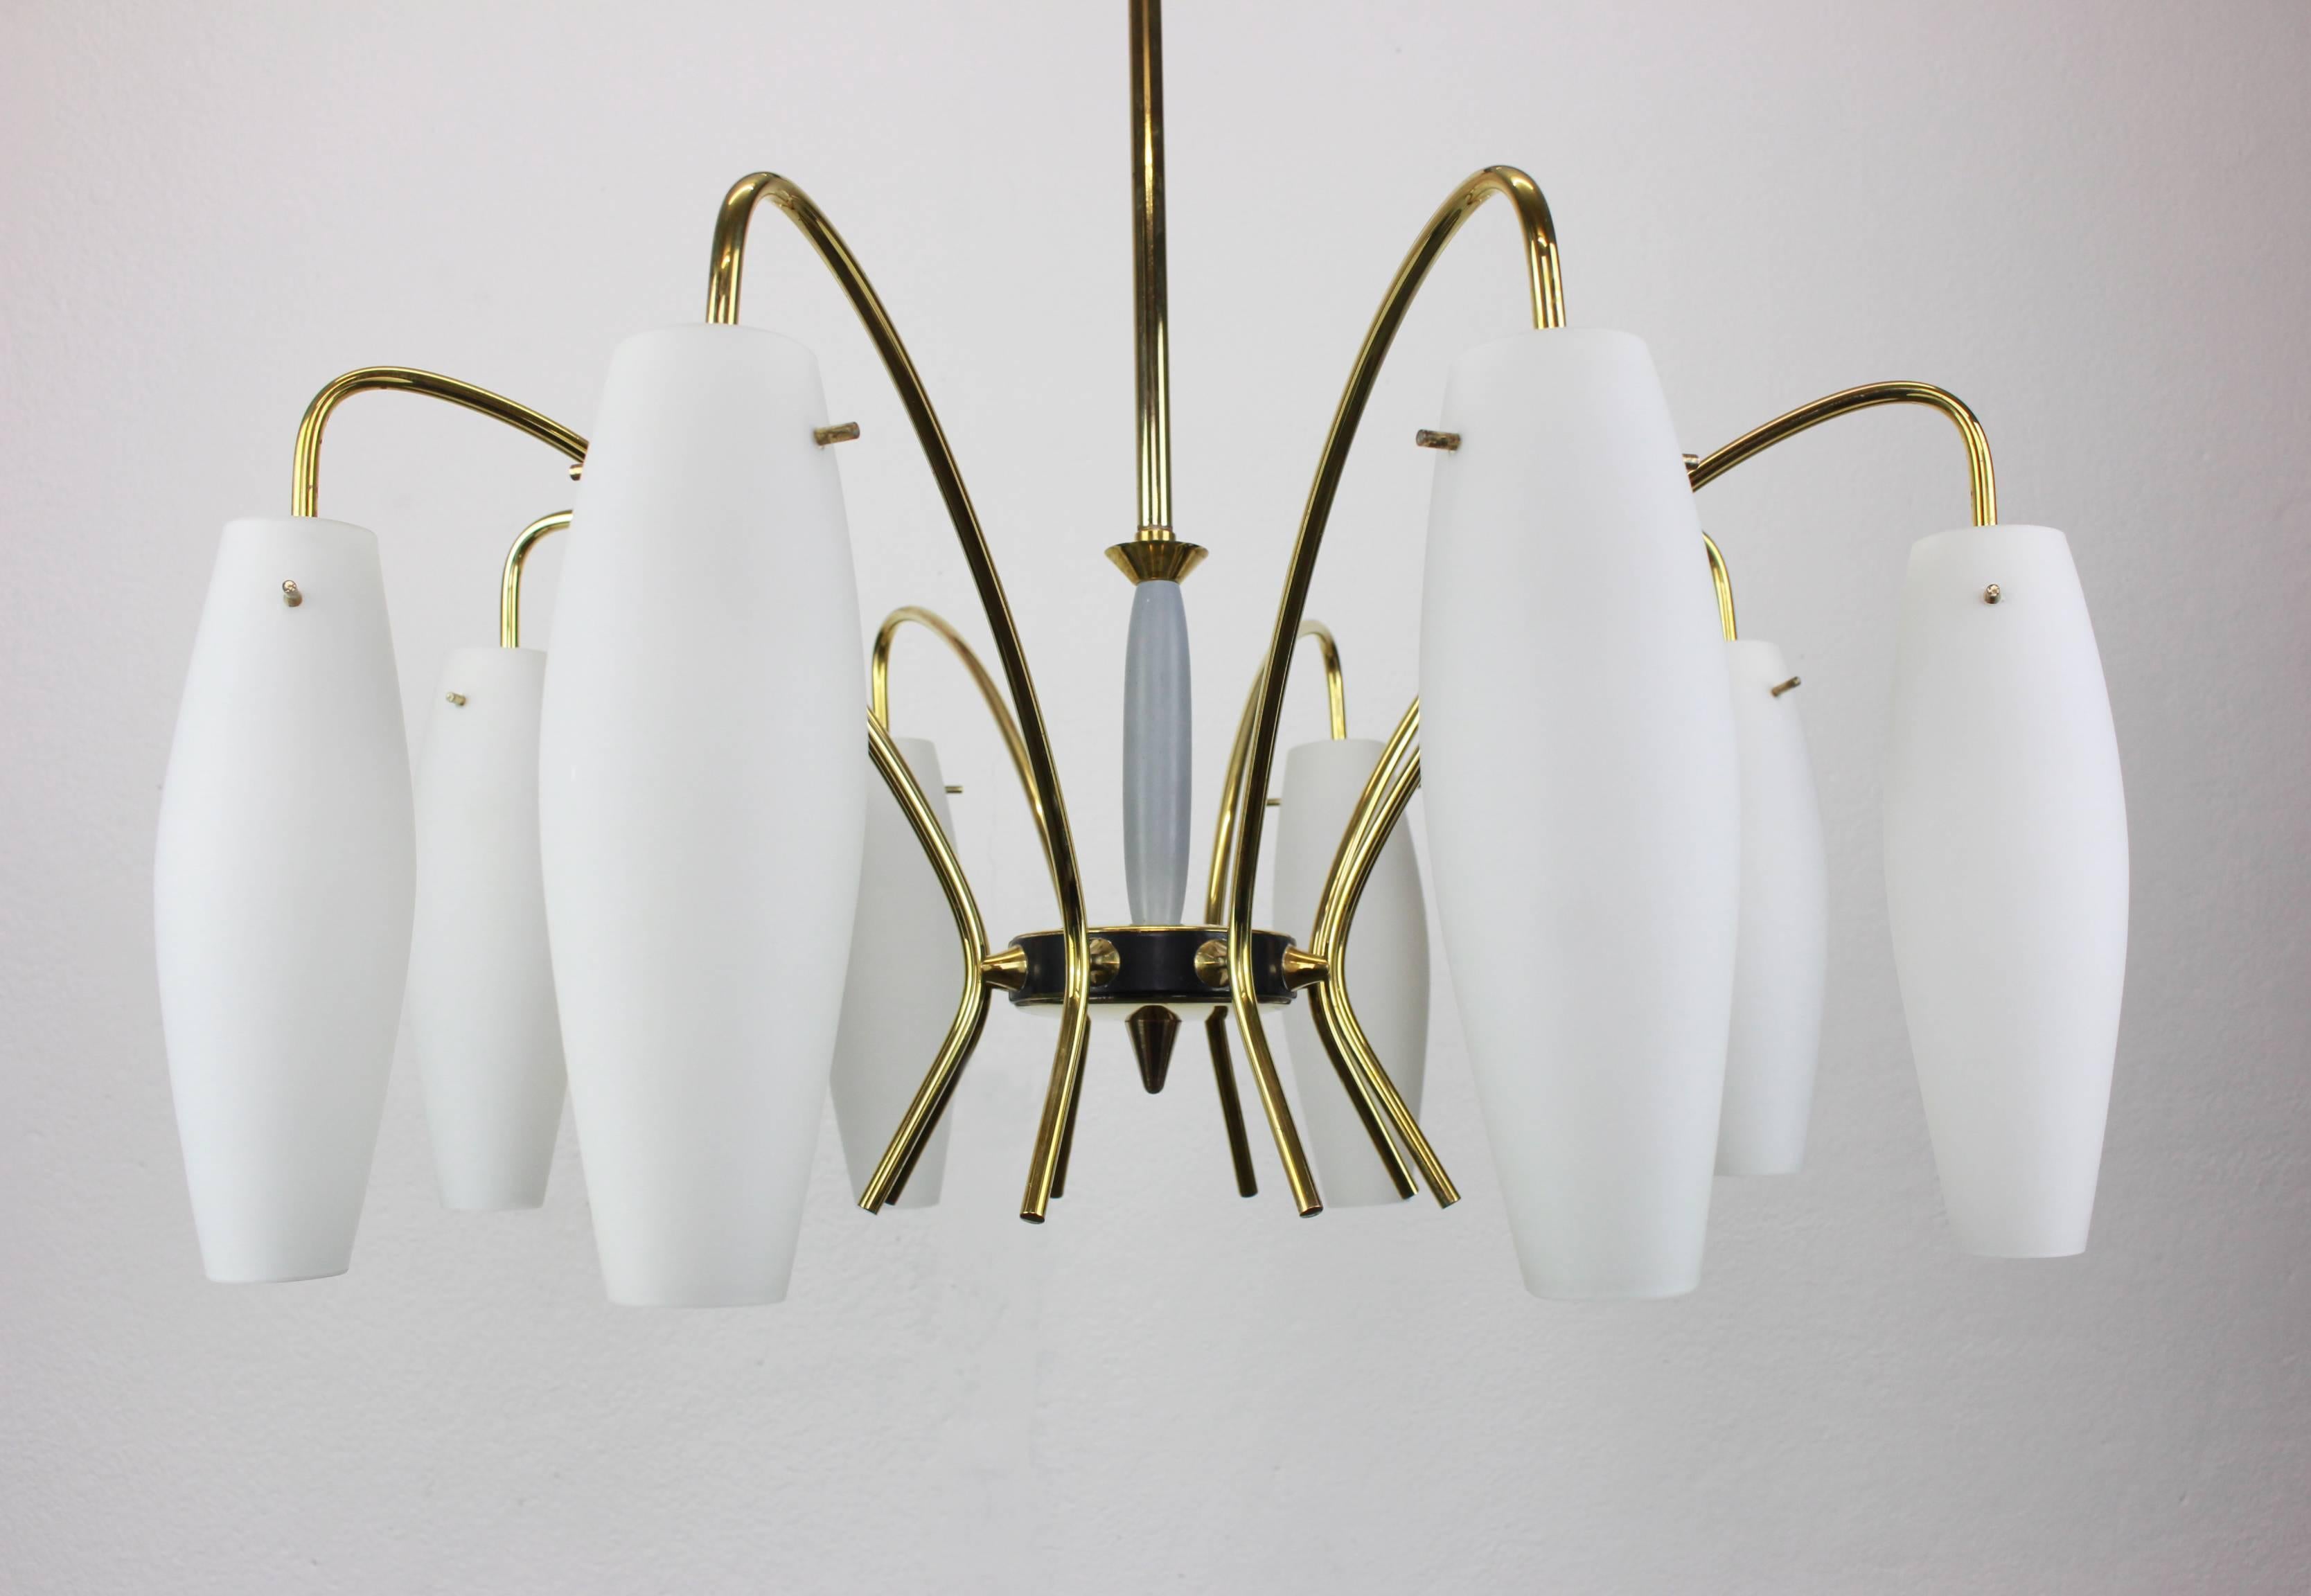 A stunning eight-light chandelier in the manner of Stilnovo, Italy, manufactured in circa 1950-1959. A handmade and high-quality piece.

High quality and in very good condition. Cleaned, well-wired and ready to use. 

The fixture requires 8 x